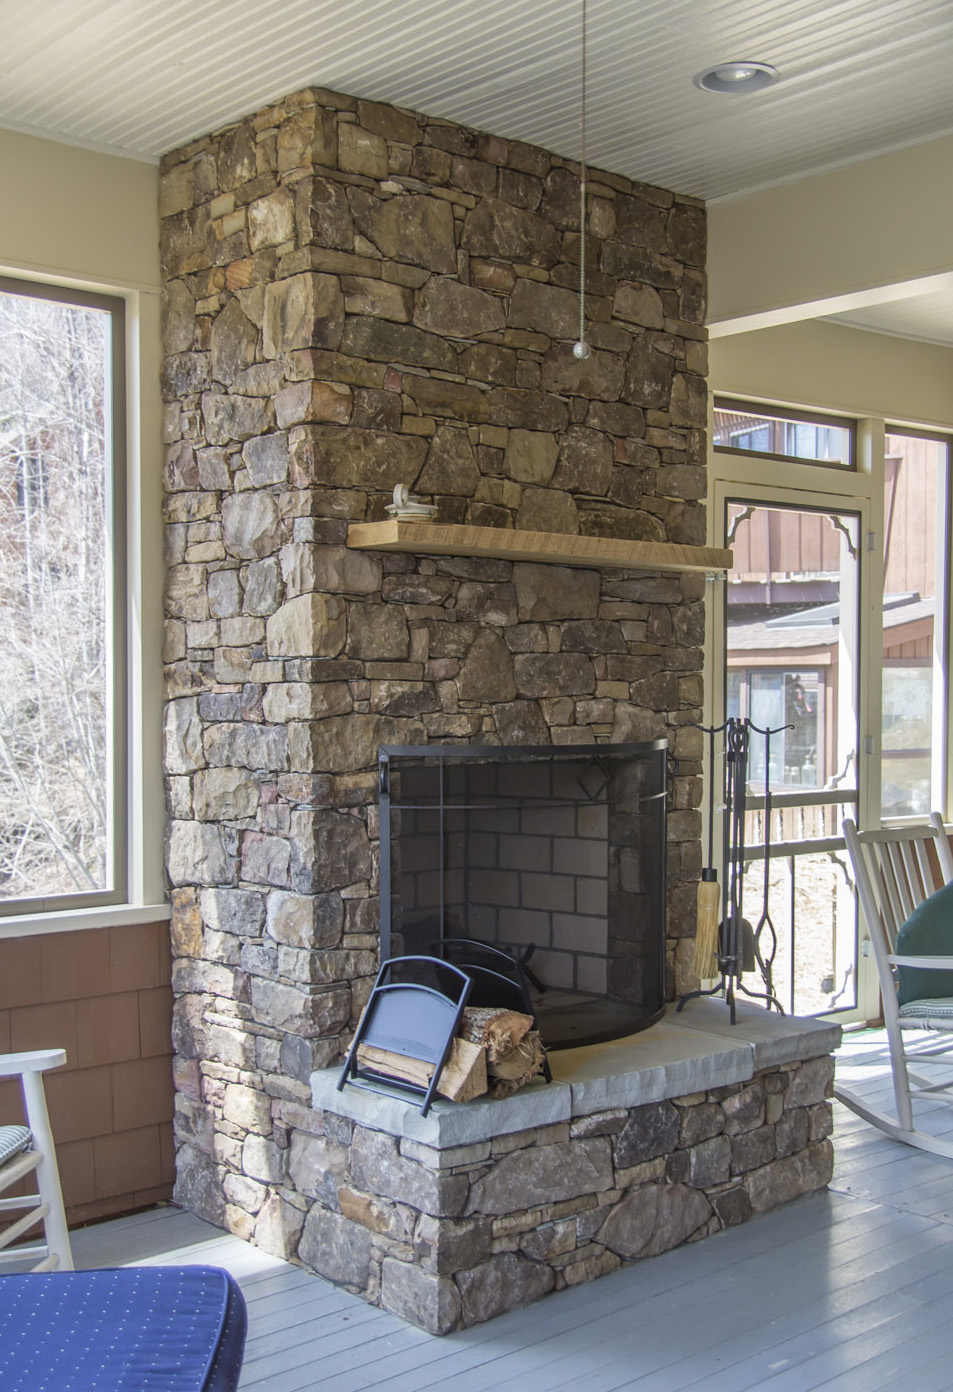 New stone fireplace in screened porch